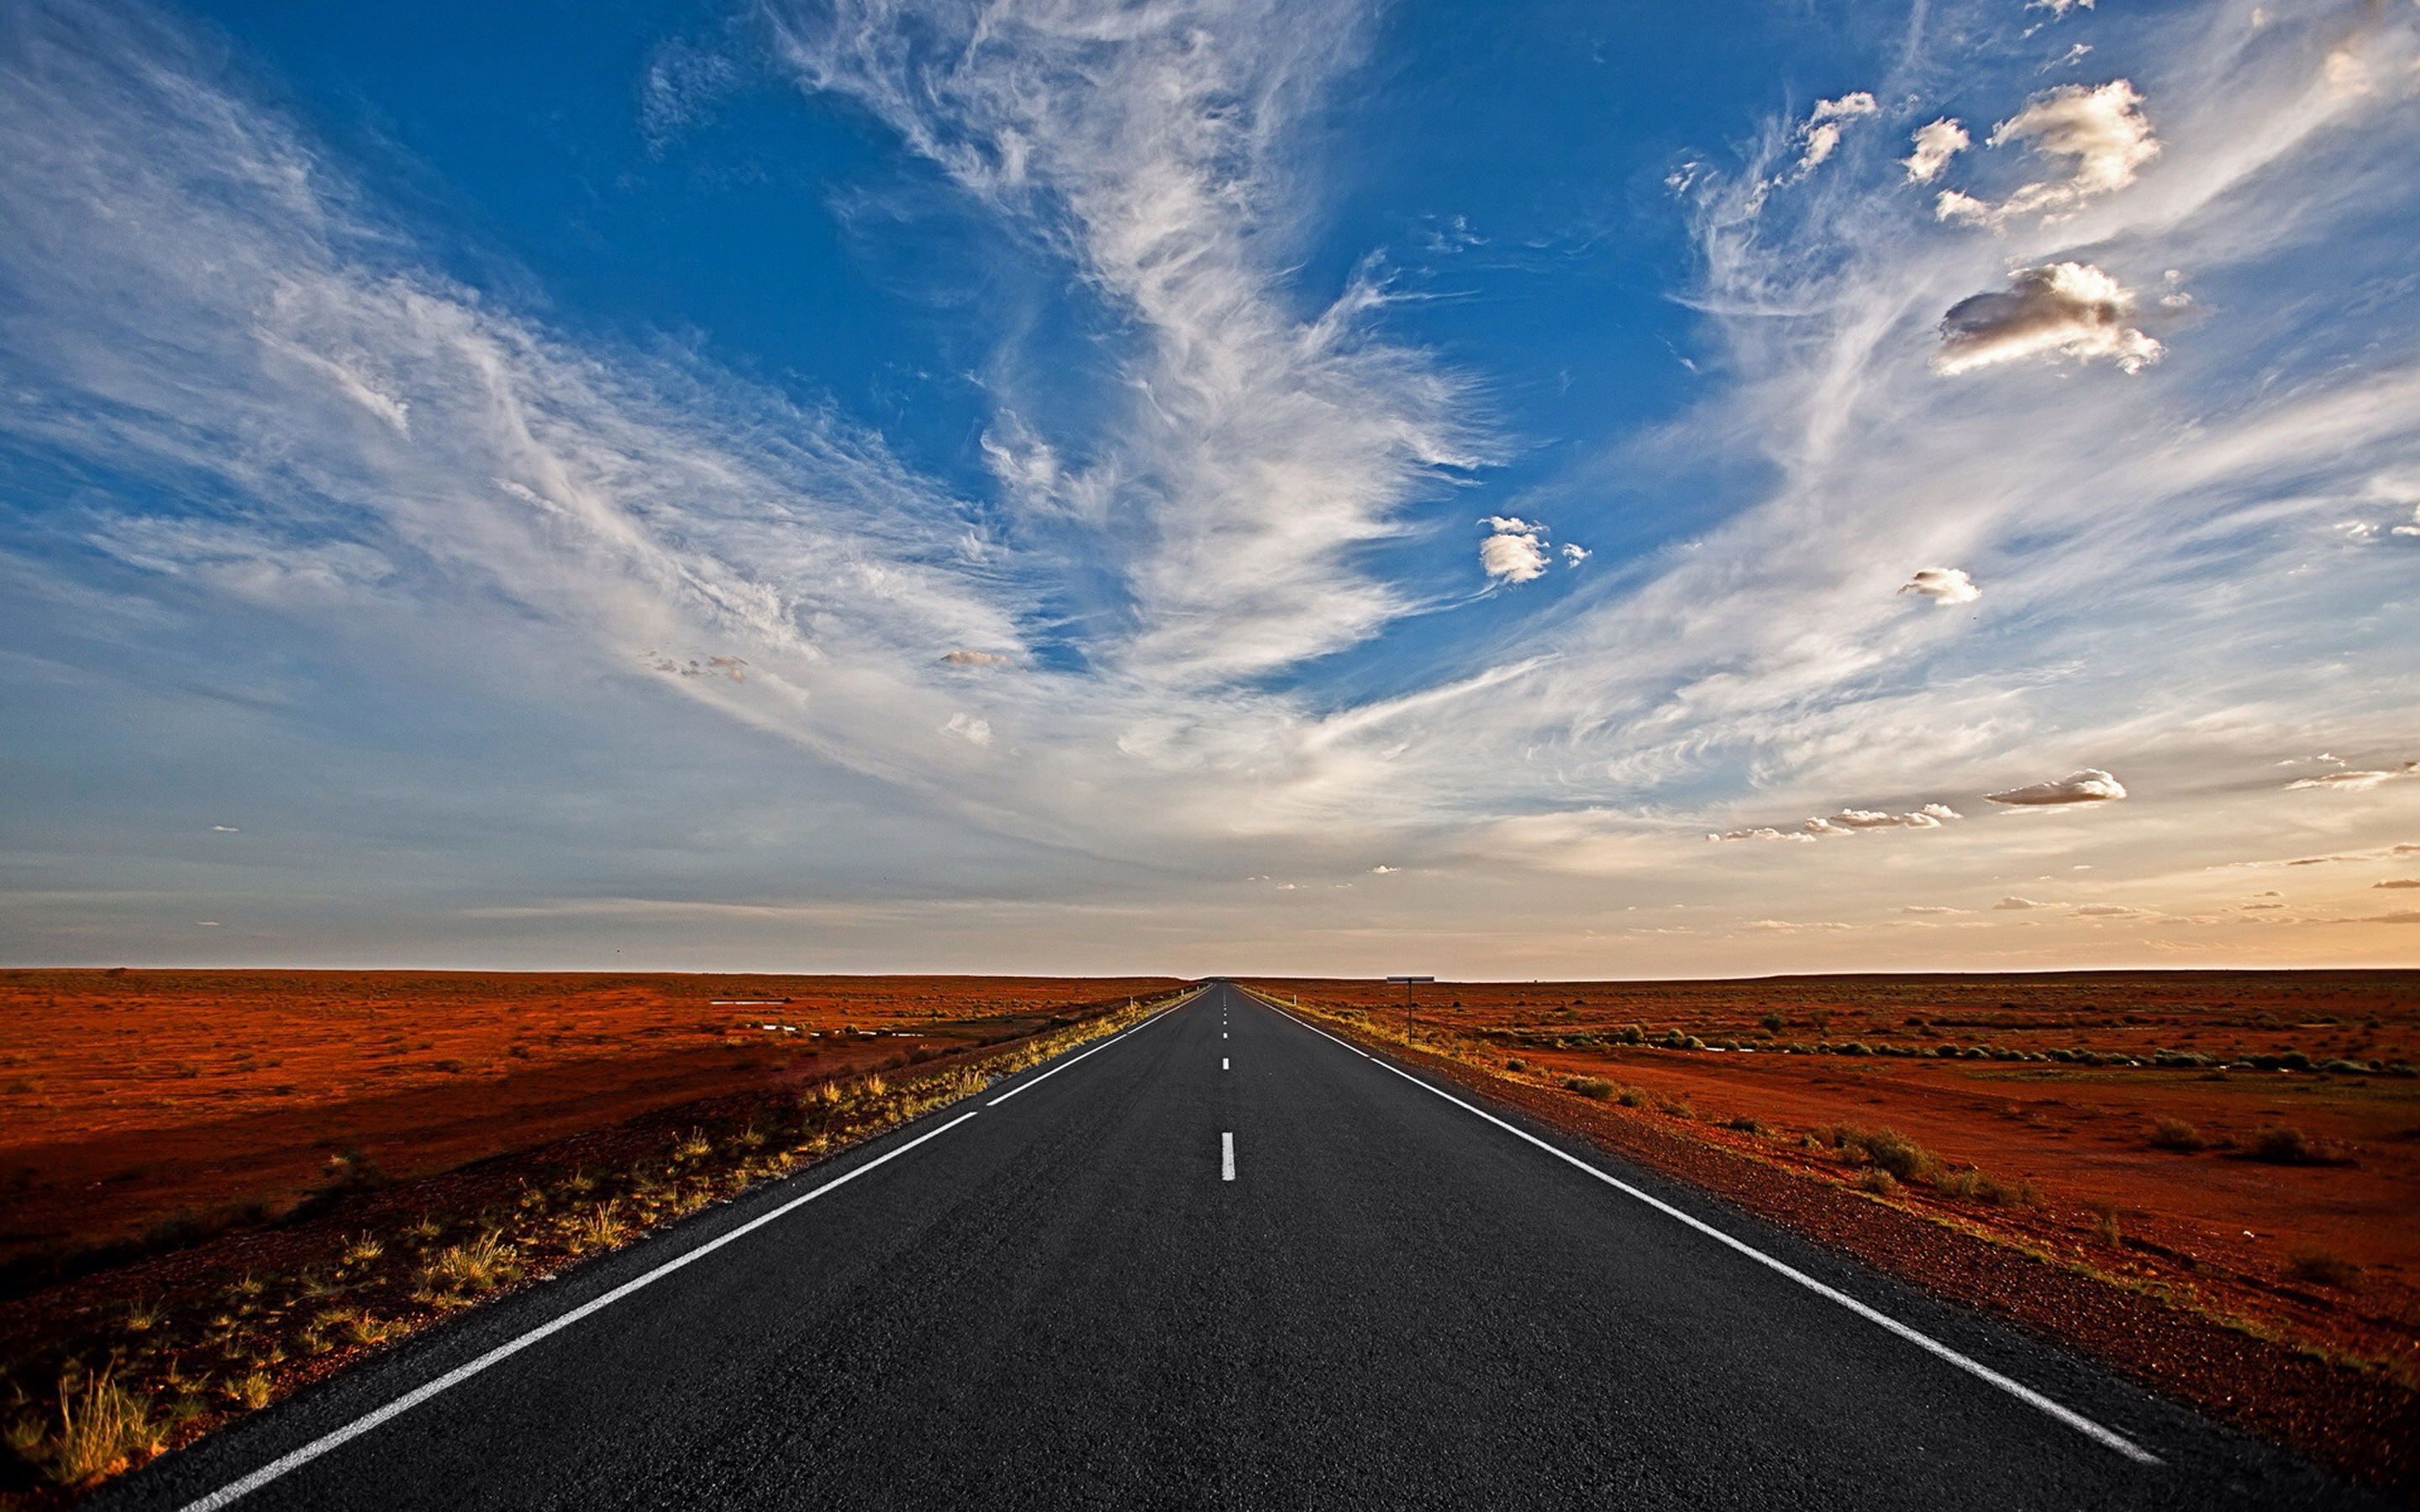 Road Blue Sky And White Clouds Desktop Backgrounds Free Download For